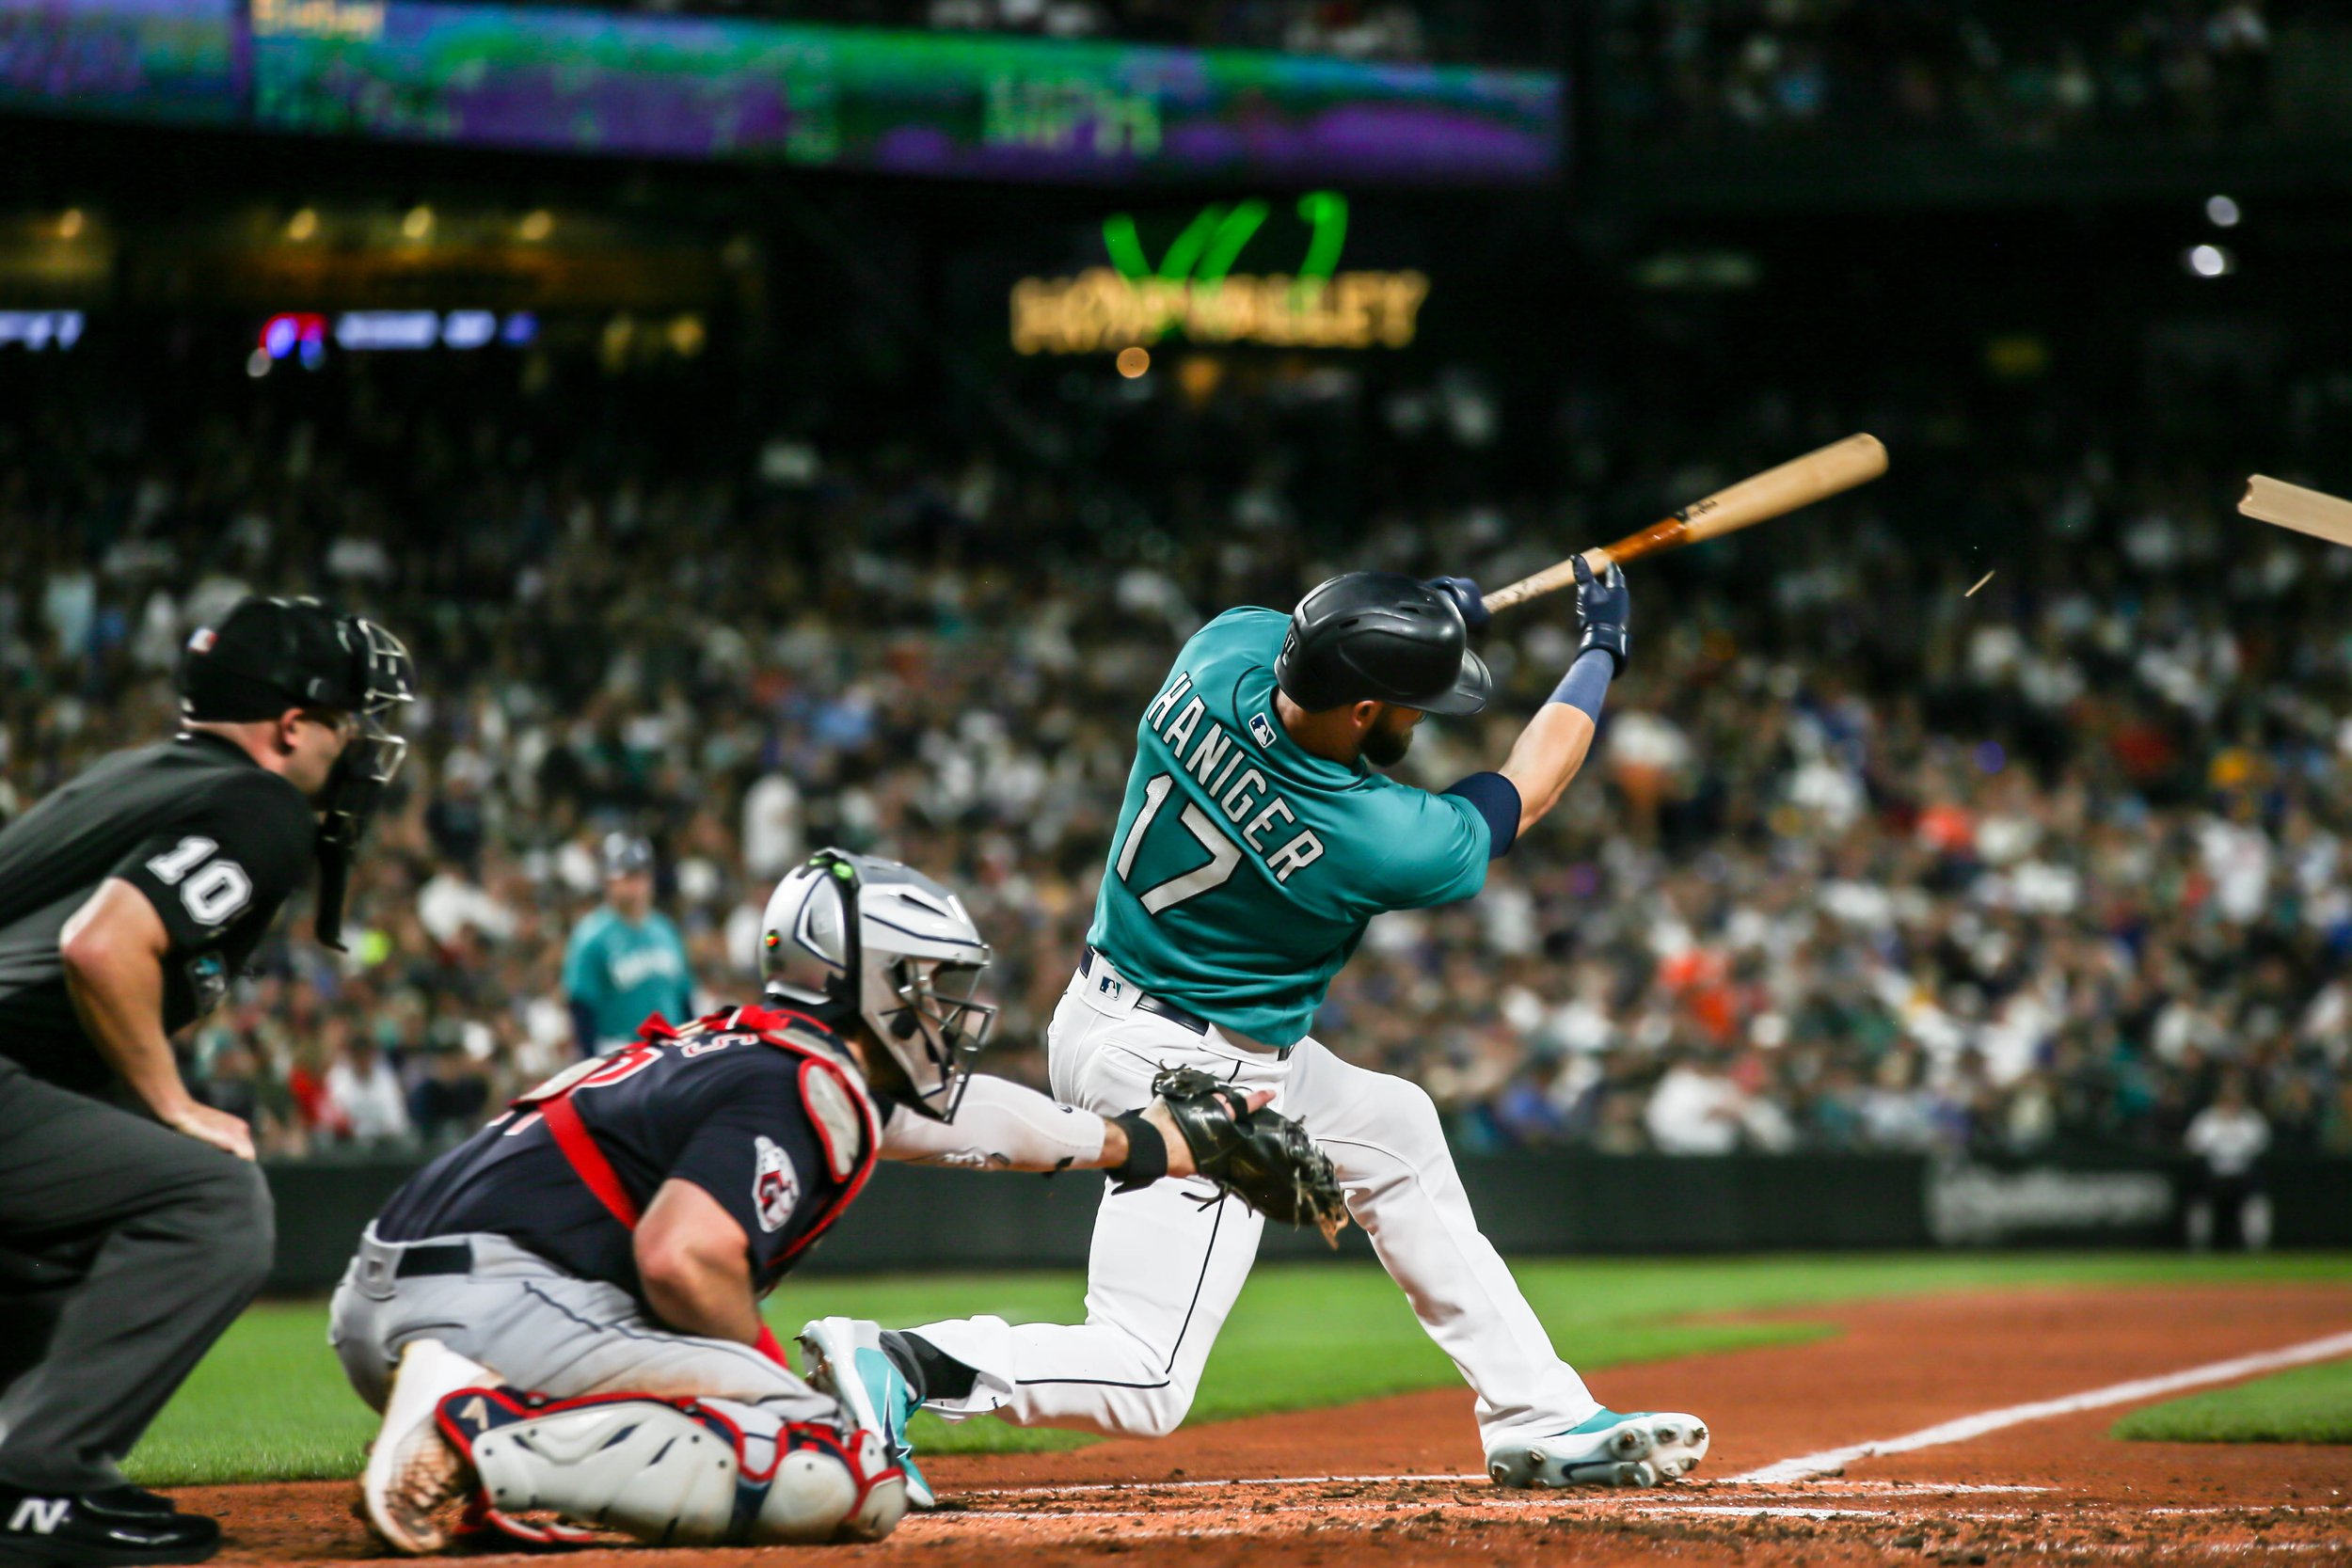 Mariners walk off the Guardians to take game two of the series